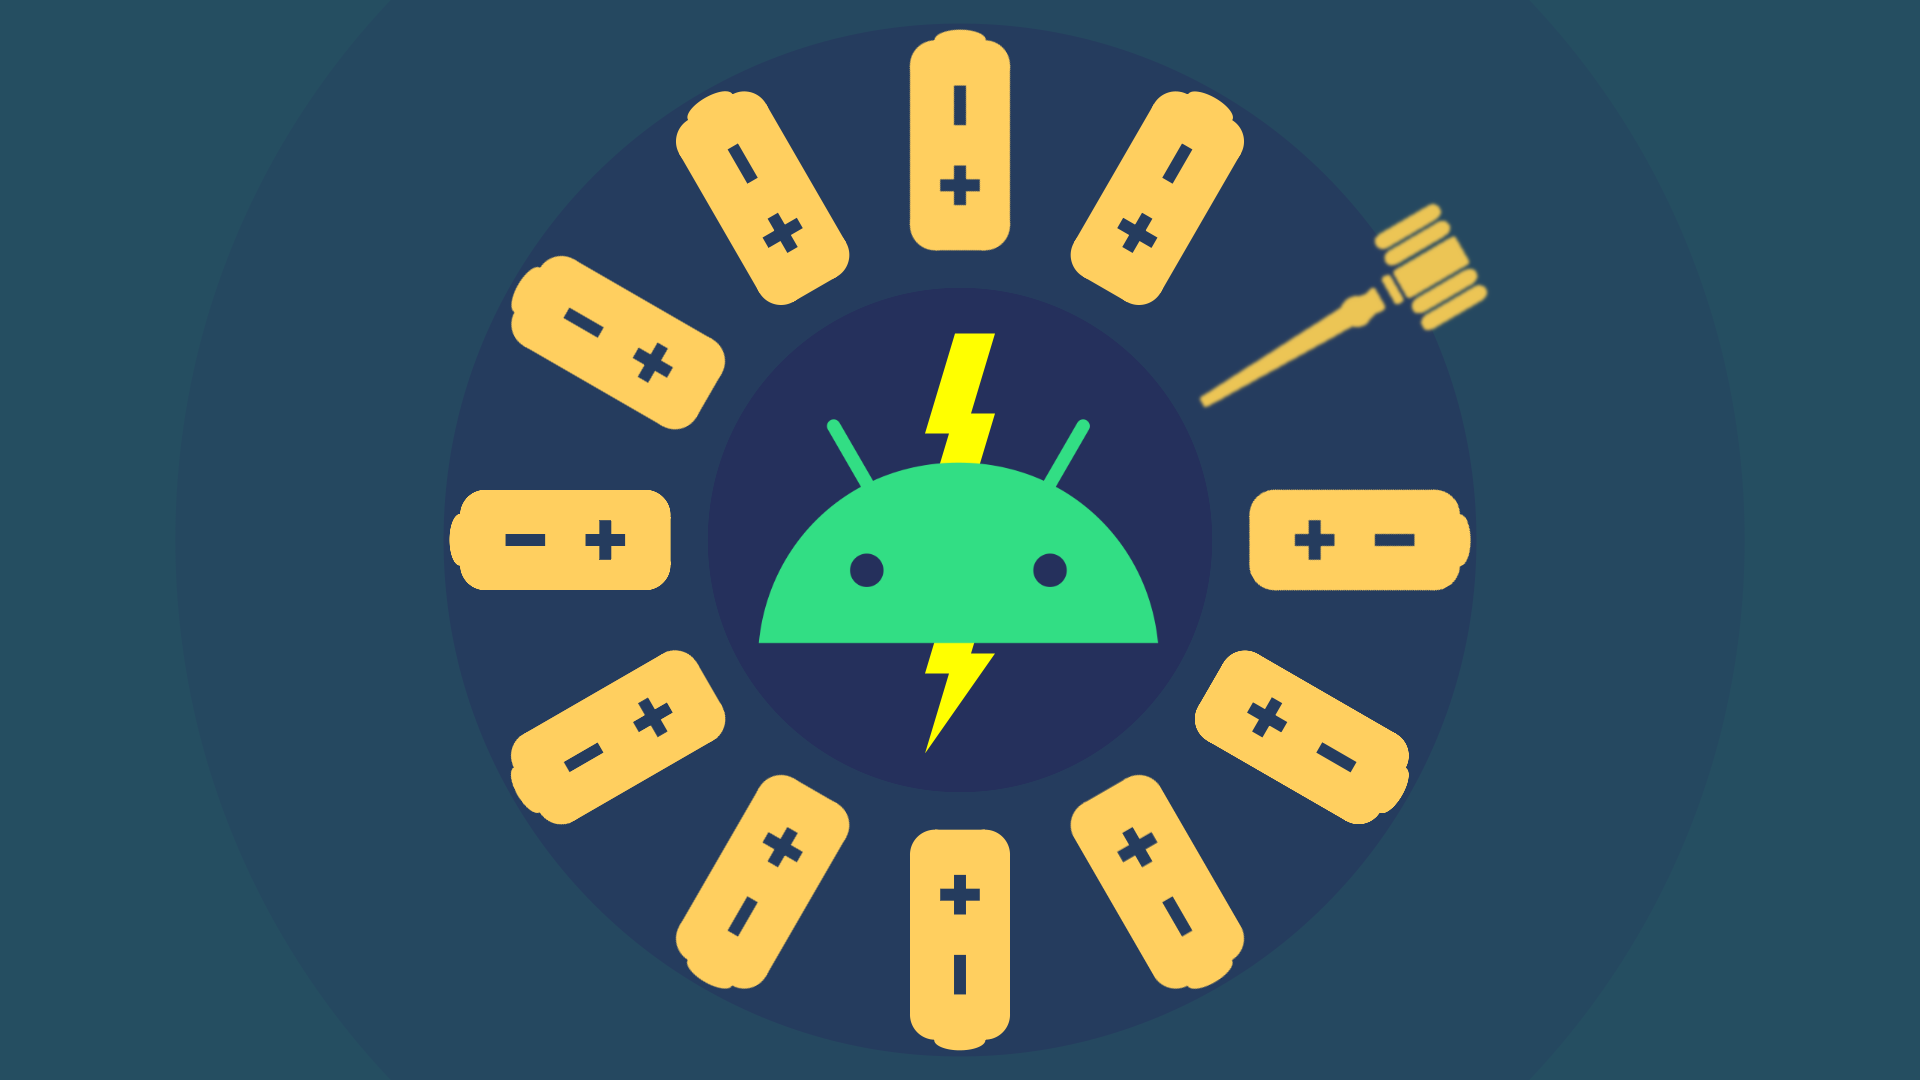 android-power-patent-lawsuit-hero